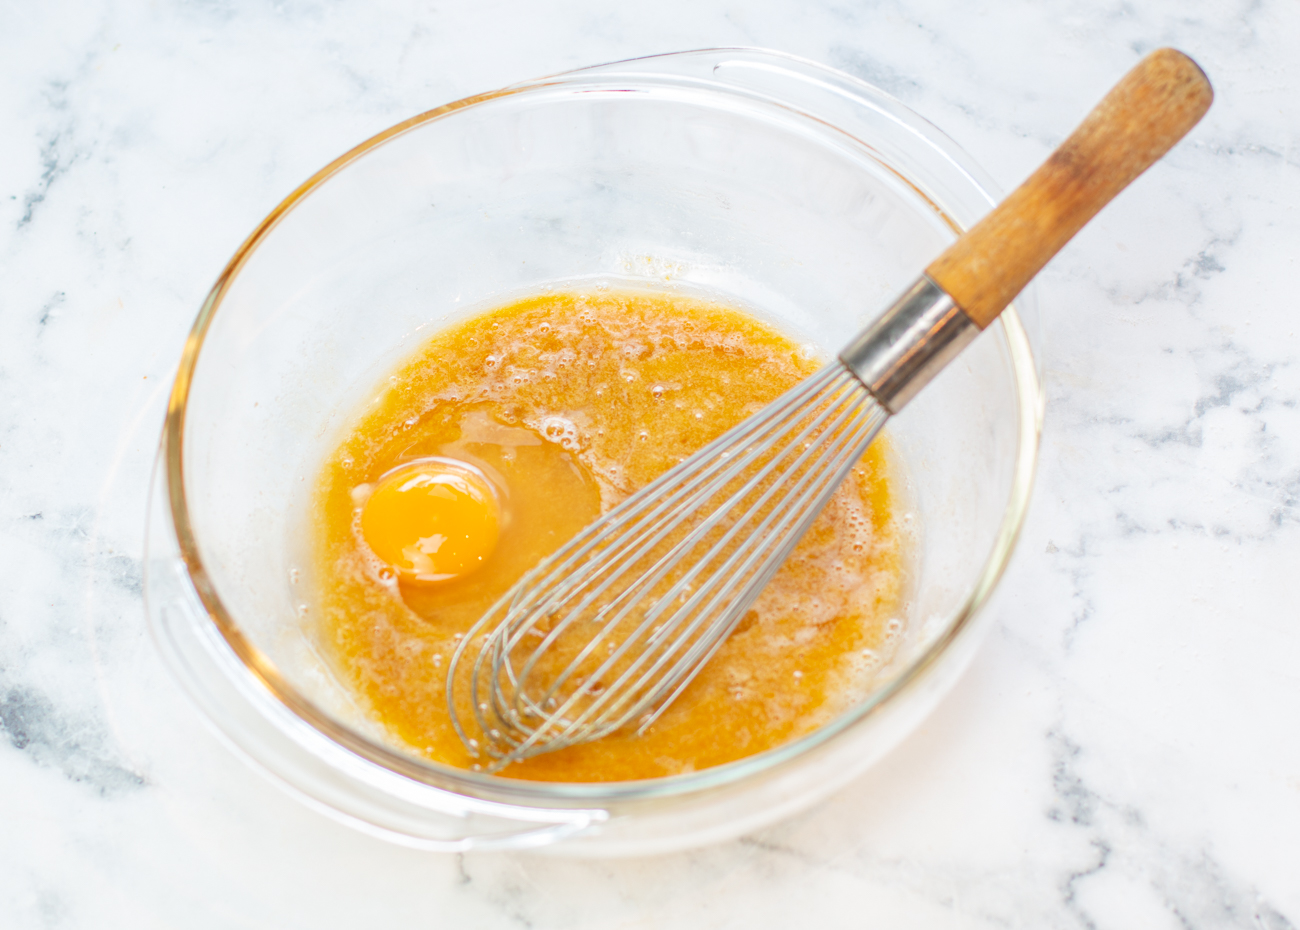 Whisk eggs and sugars together